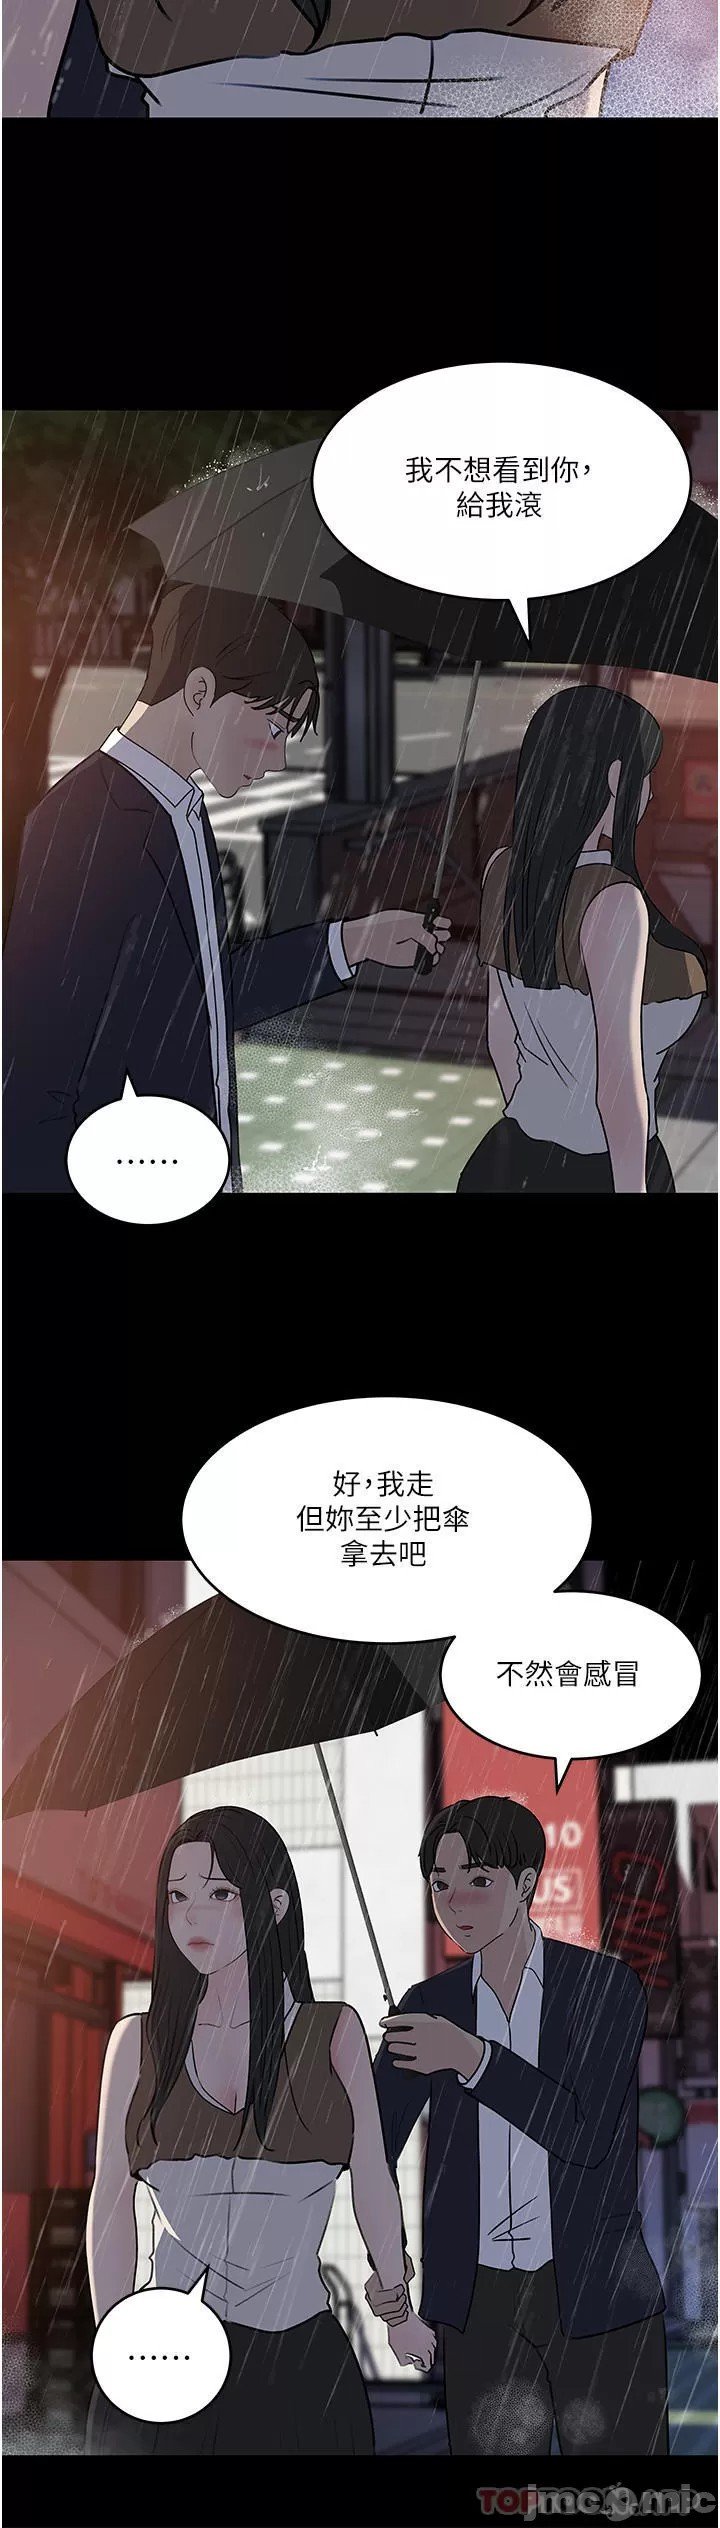 in-my-sister-in-law-raw-chap-45-39